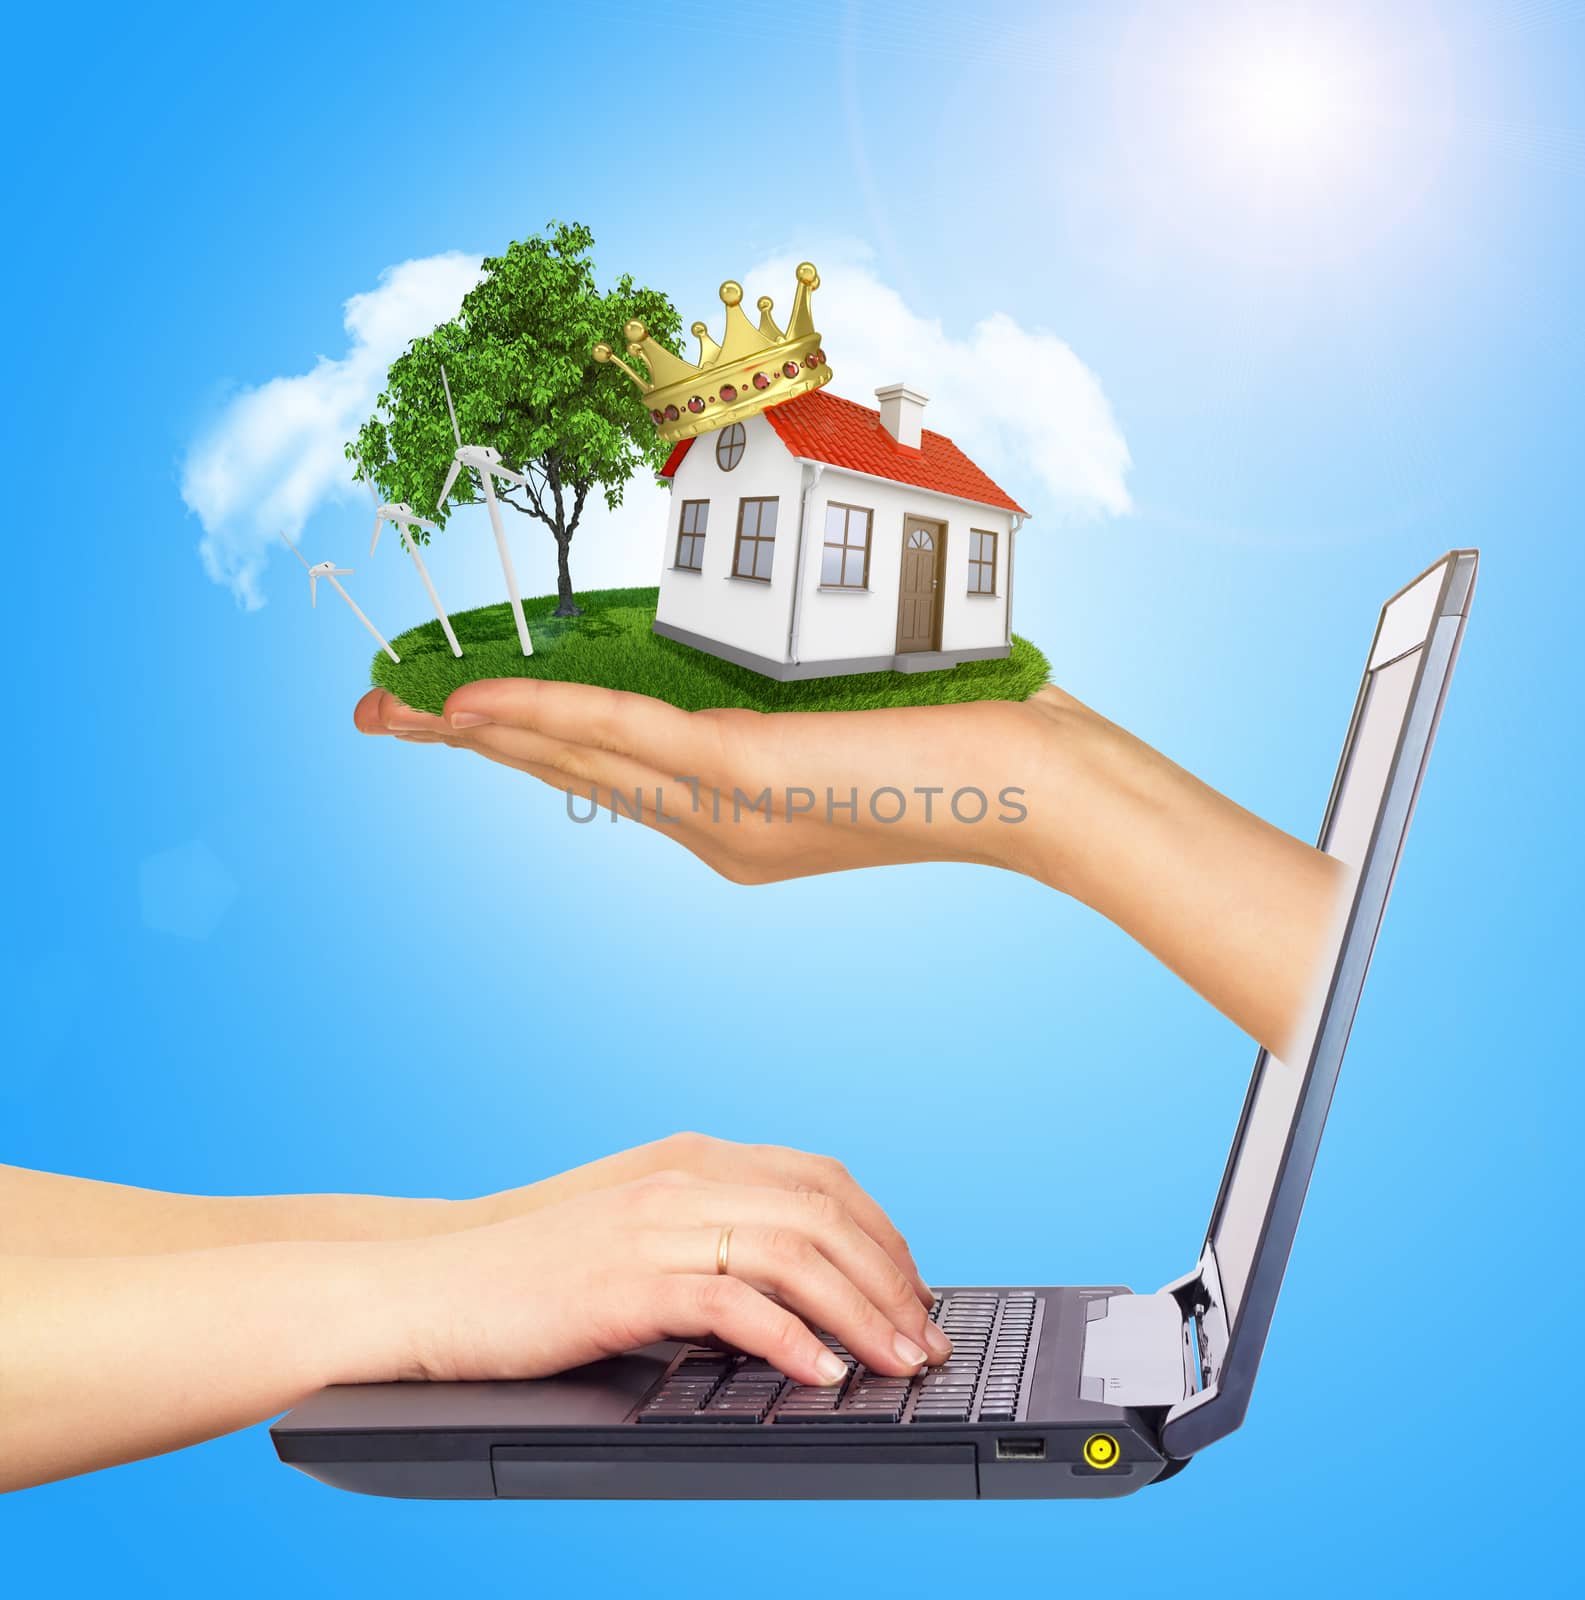 White house for sale with red roof in hand , crown and chimney of screen laptop. Hands typing on keyboard. Background sun shines brightly on right. Blue sky